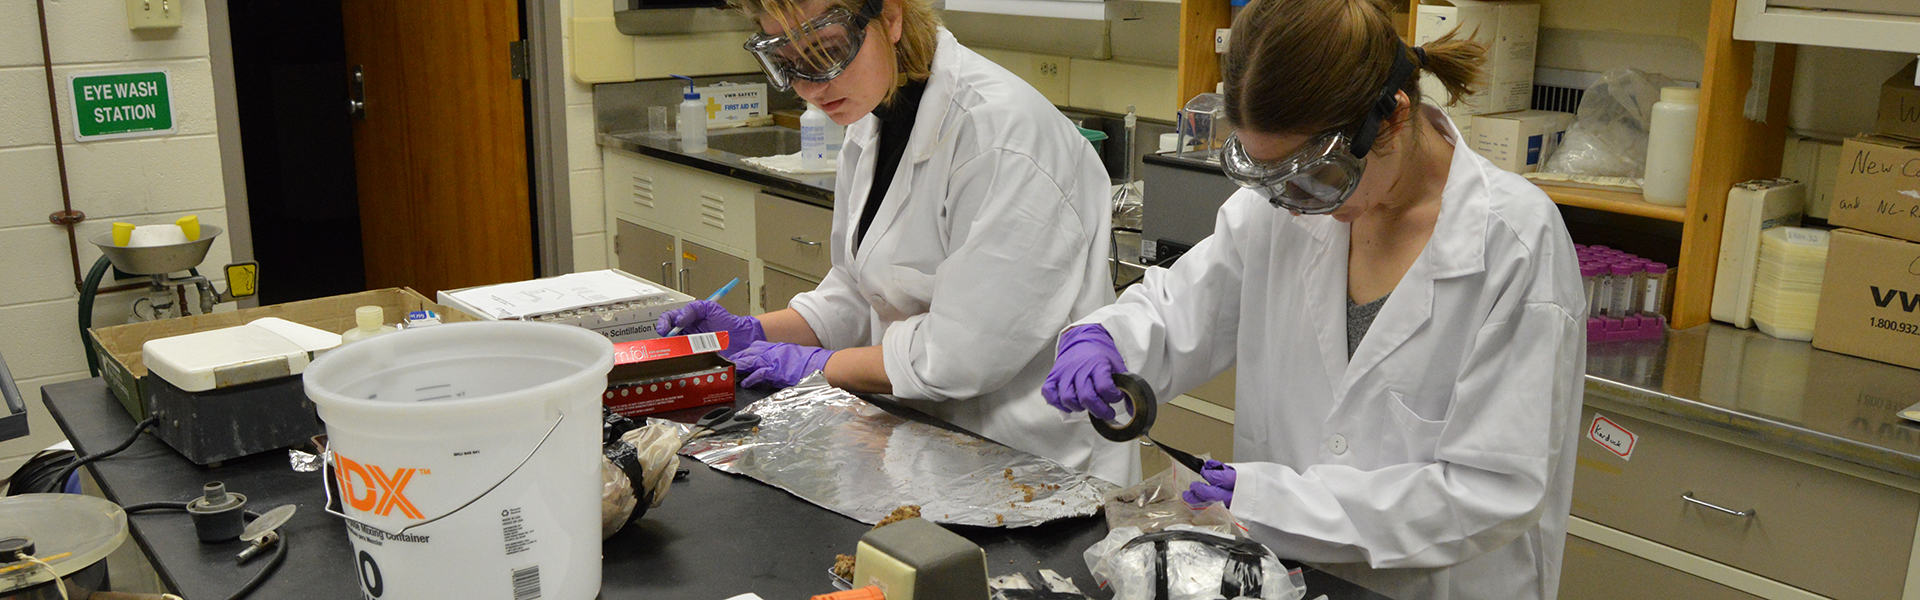 sarah ivory in lab unwrapping rock samples